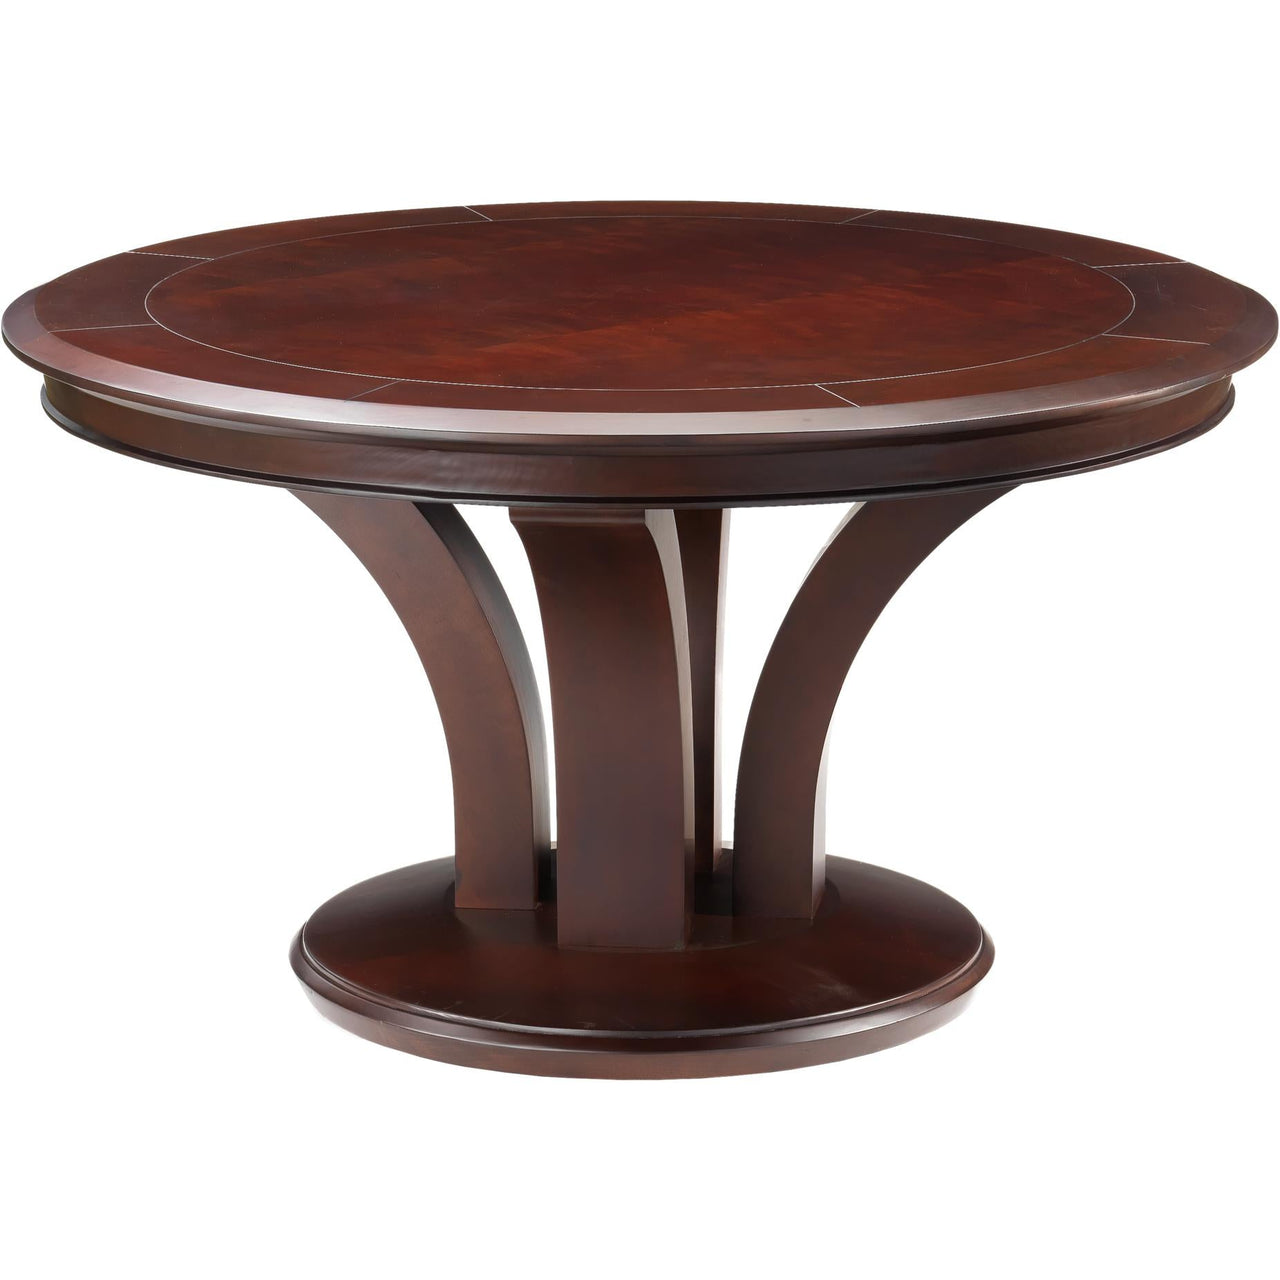 Convertible Round Poker & Dining Table Treviso by Darafeev-AMERICANA-POKER-TABLES